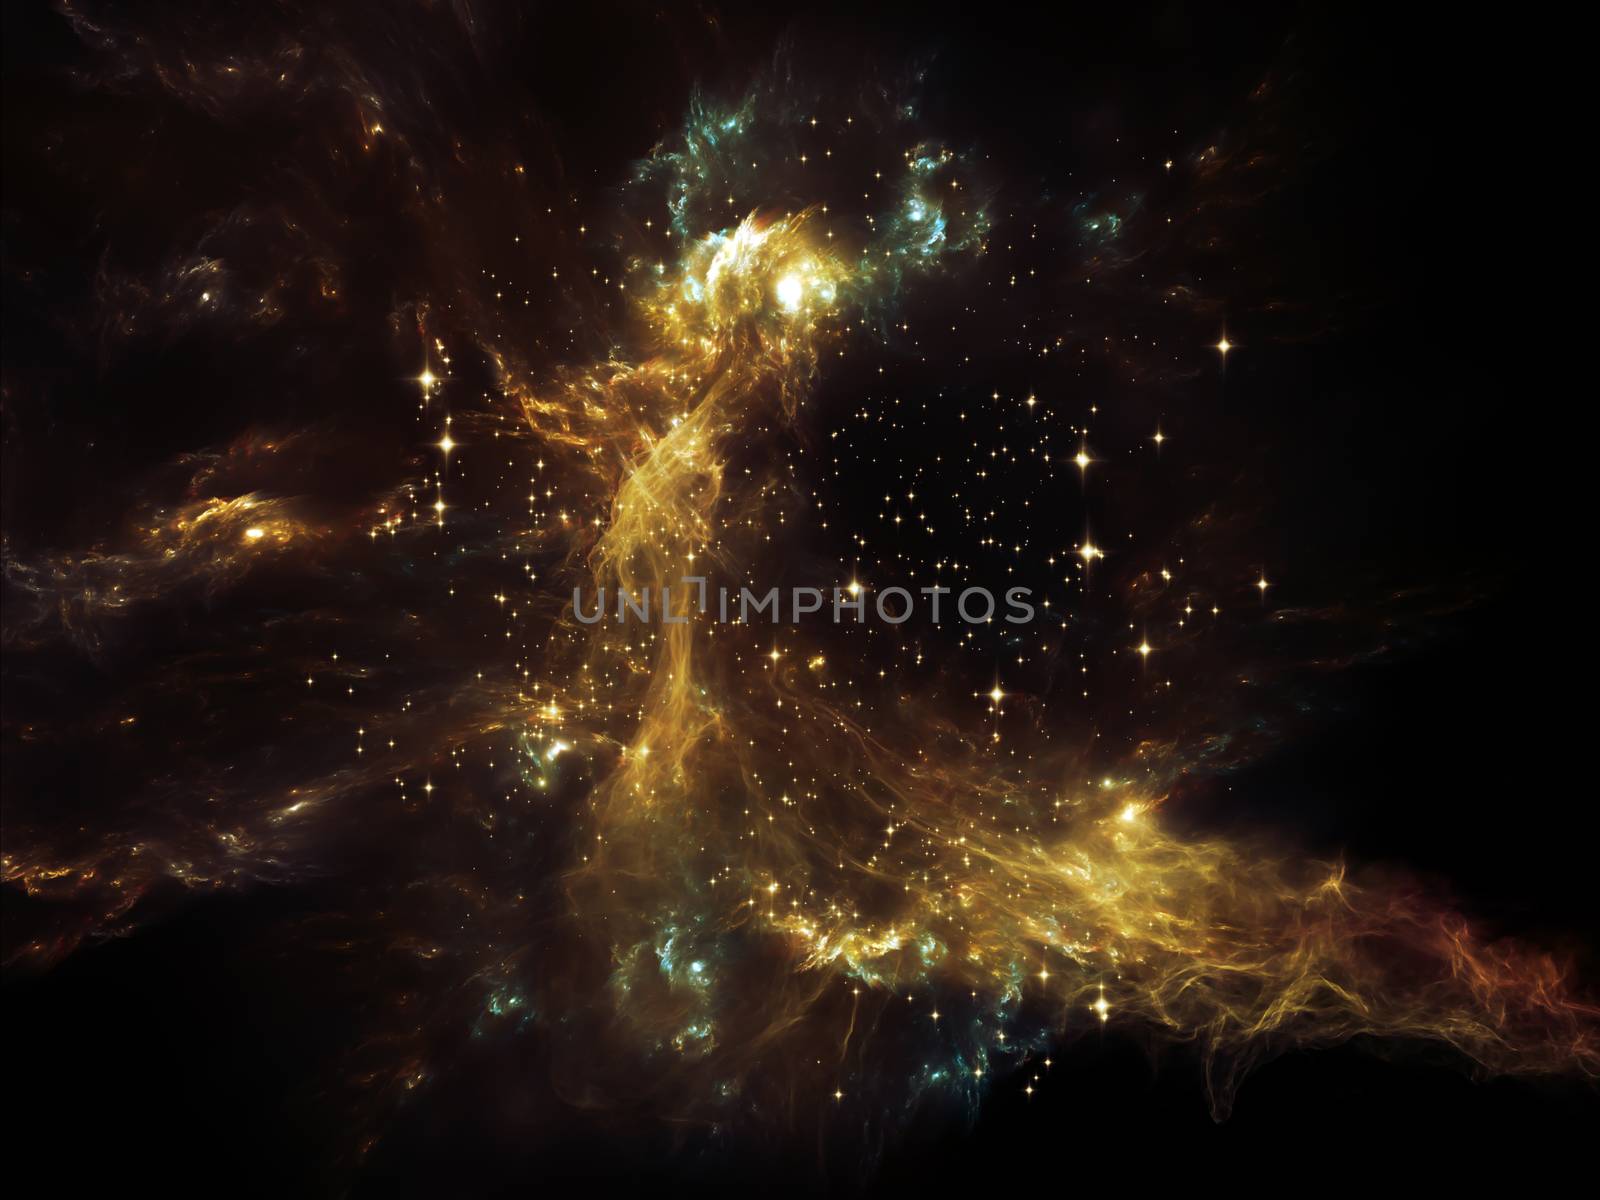 Universe Is Not Enough series. Artistic background made of fractal elements, lights and textures for use with projects on fantasy, science, religion and design